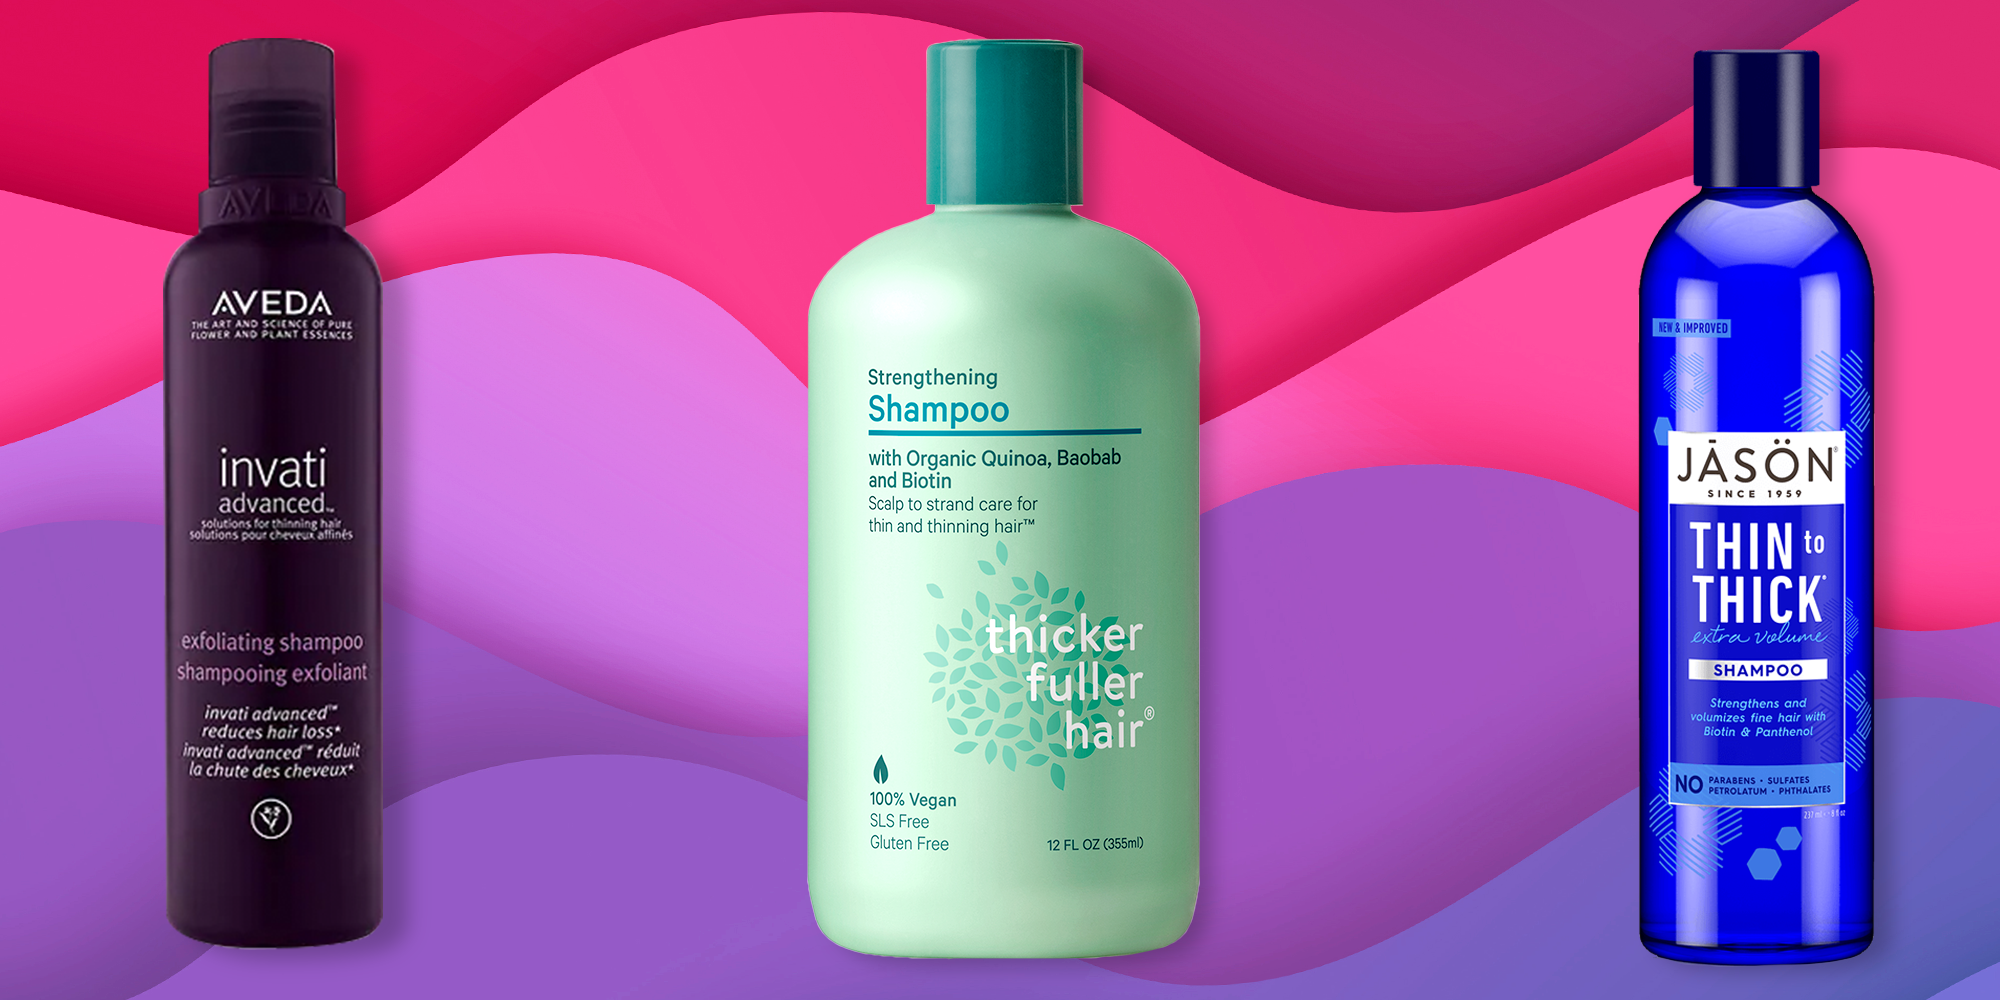 6. "The Best Natural Shampoos for Maintaining Blue Hair Color" - wide 3